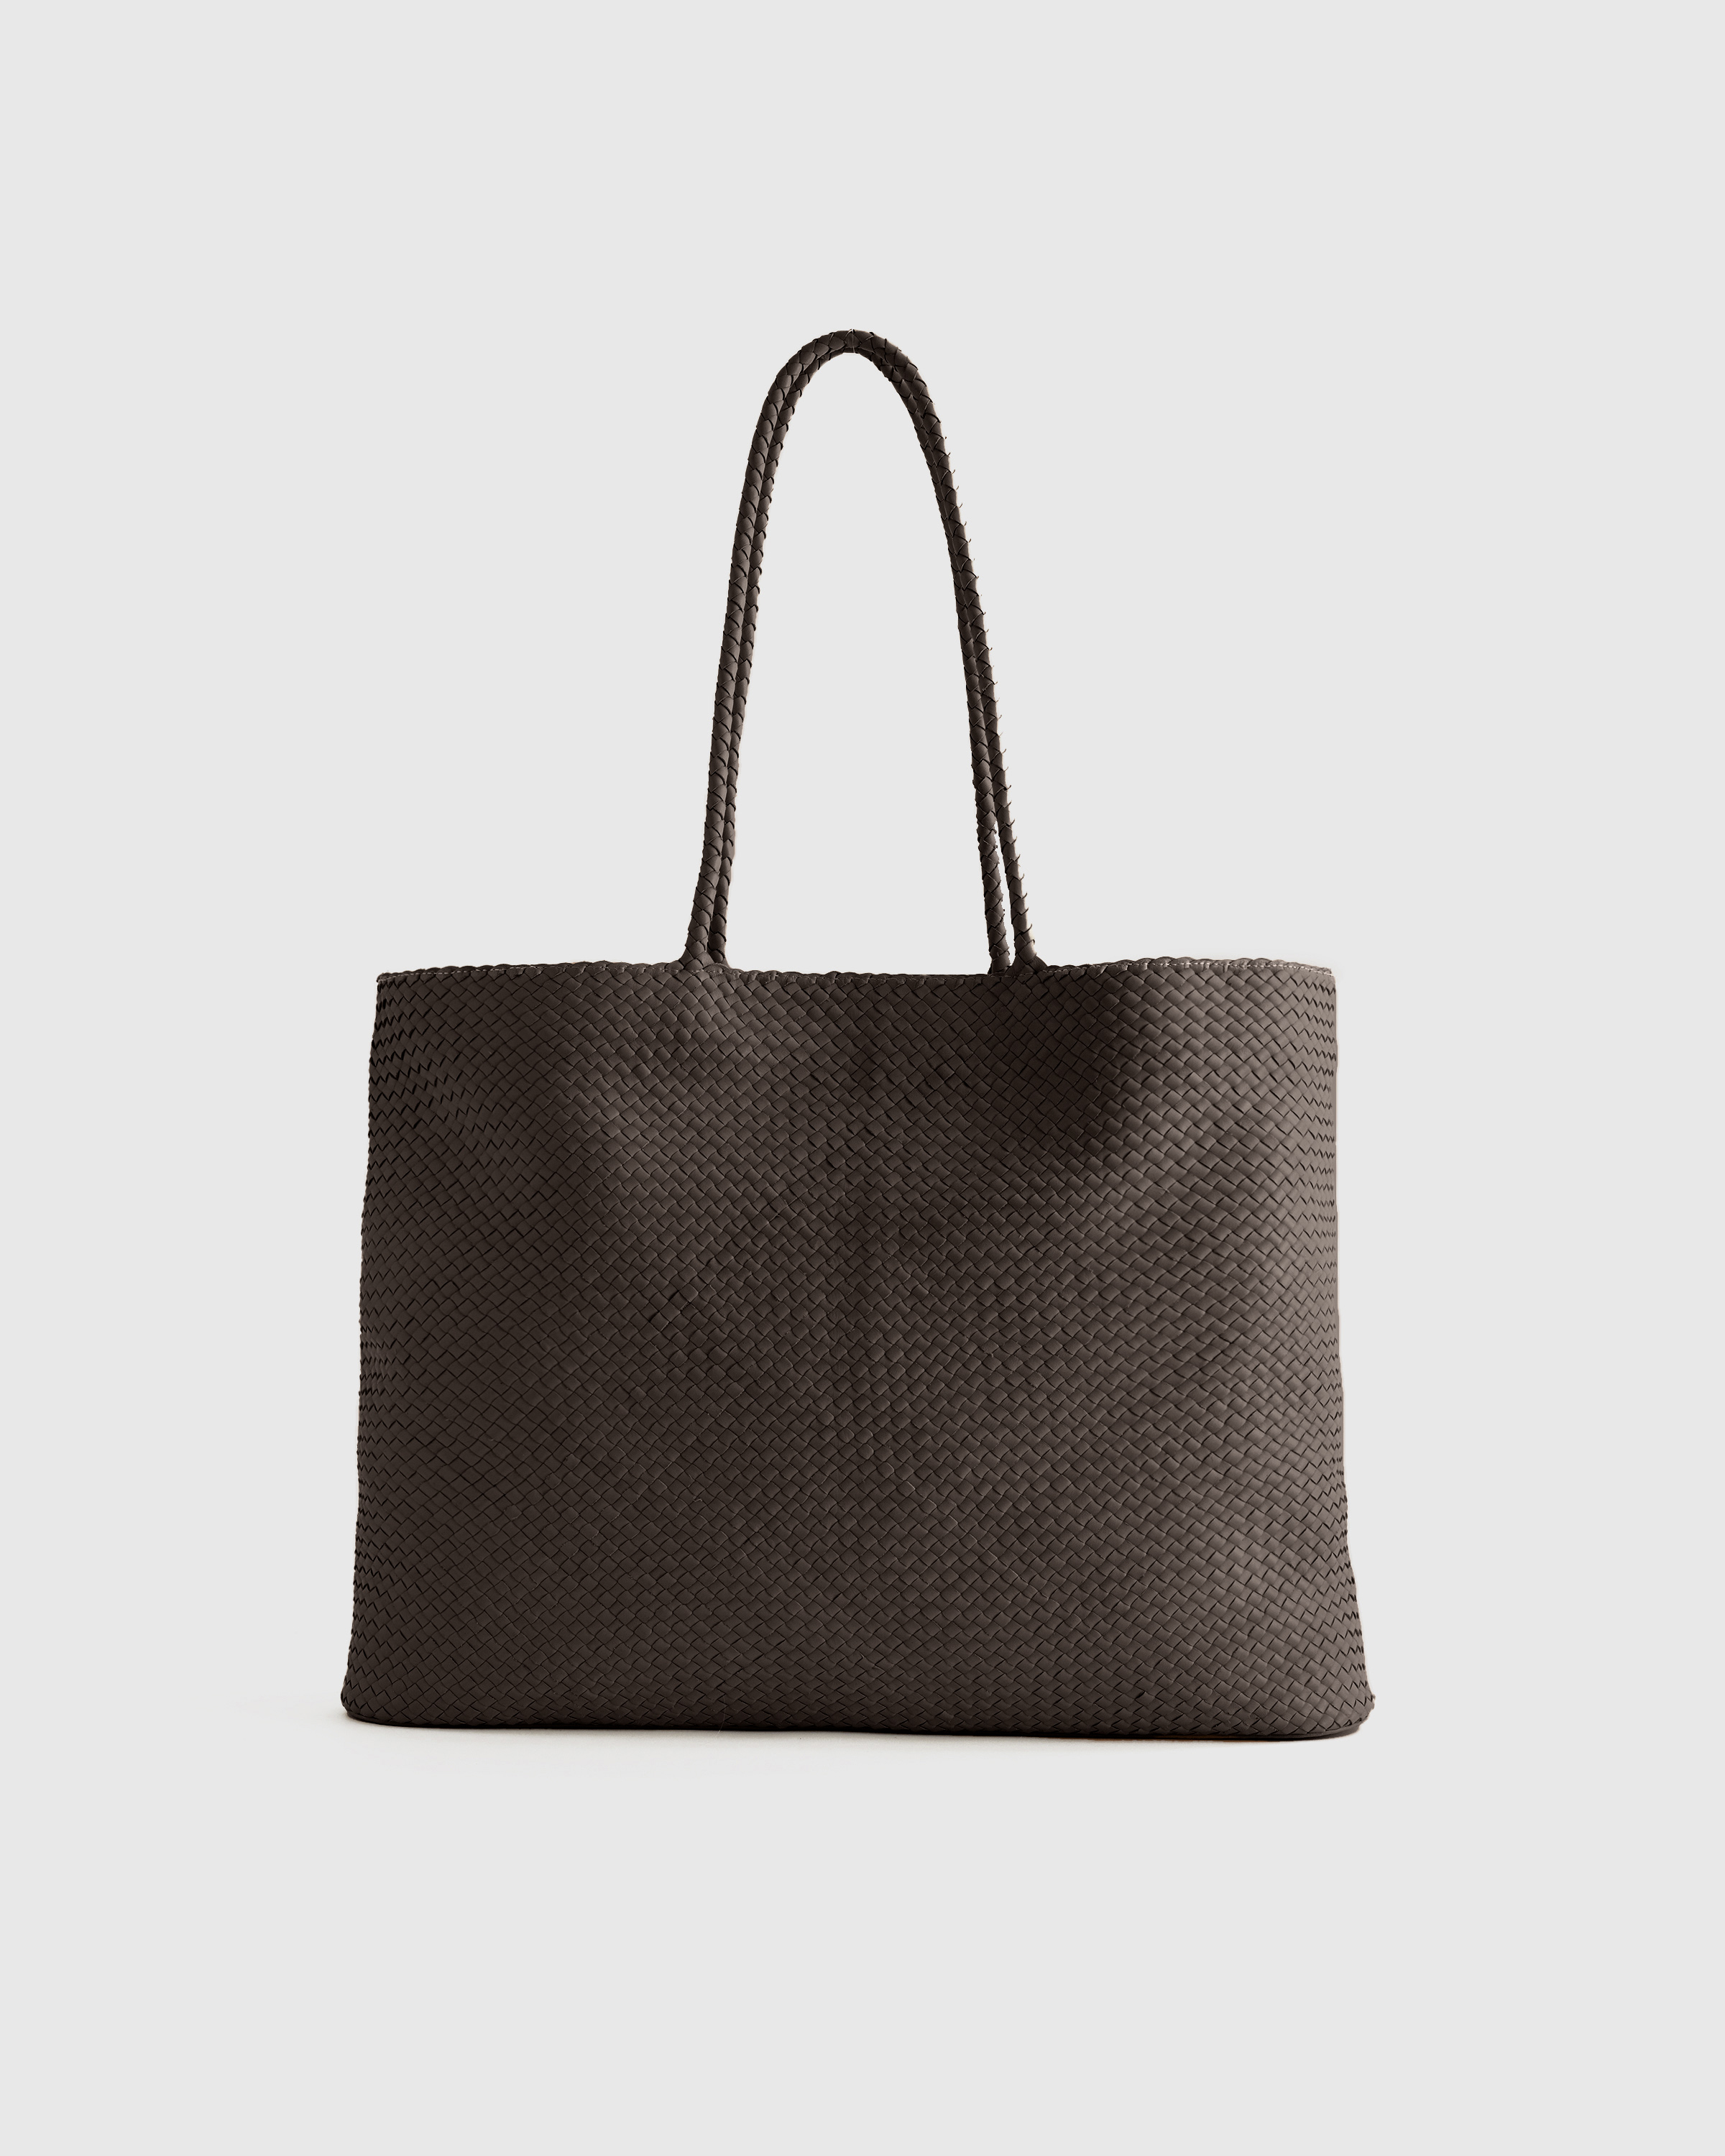 Tote bag leather